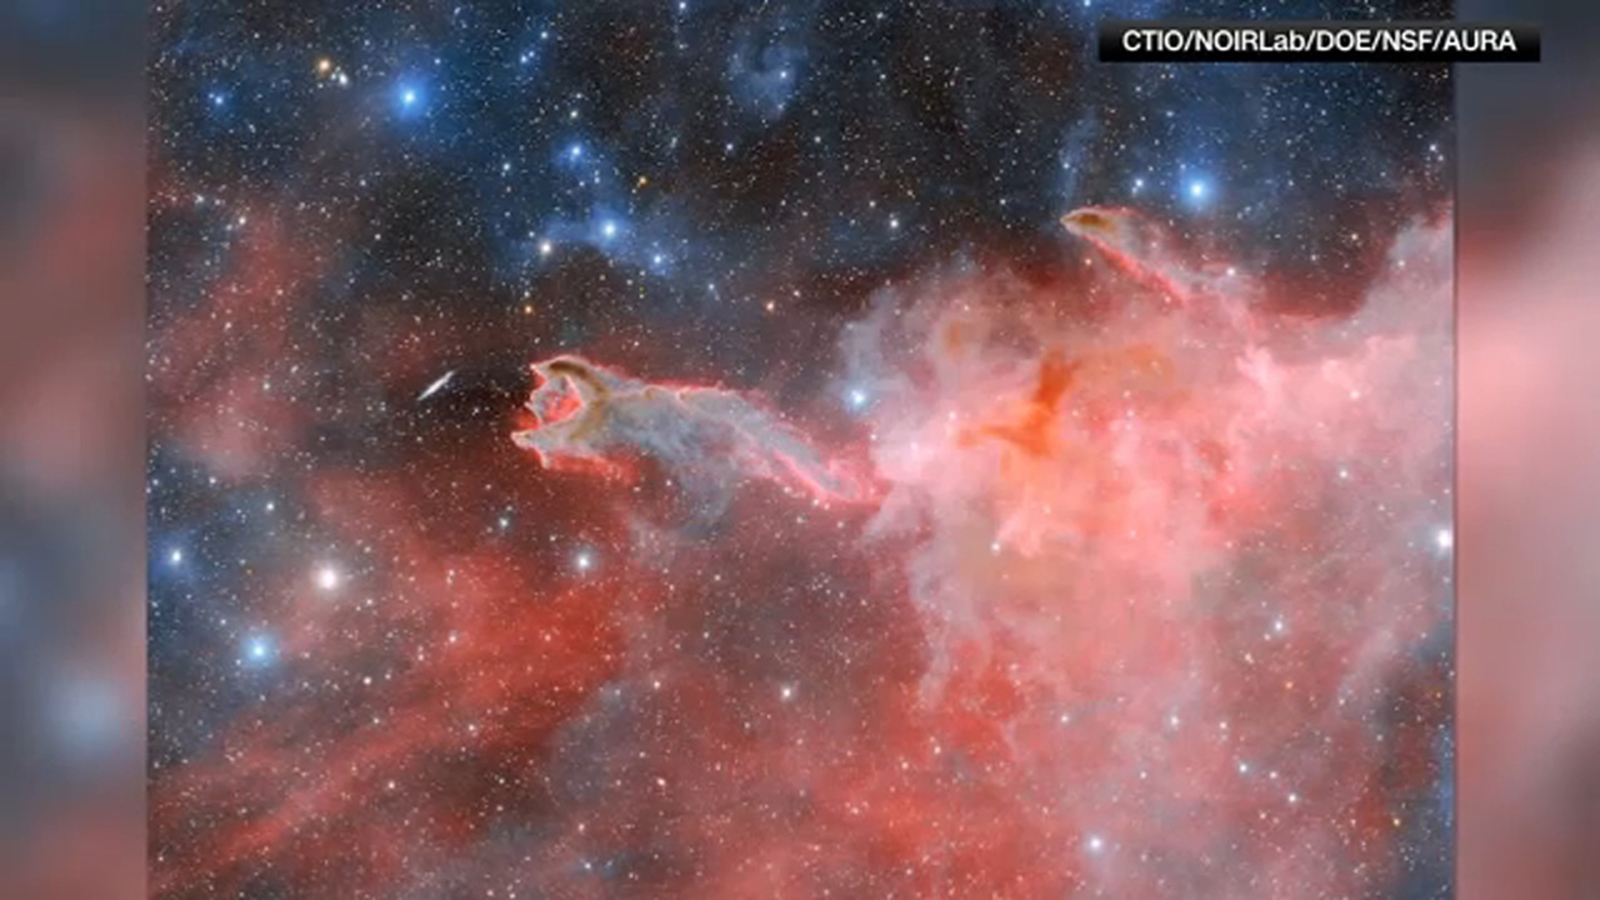 ‘God’s Hand’ – stunning space image shows shape of hand reaching across the galaxy [Video]